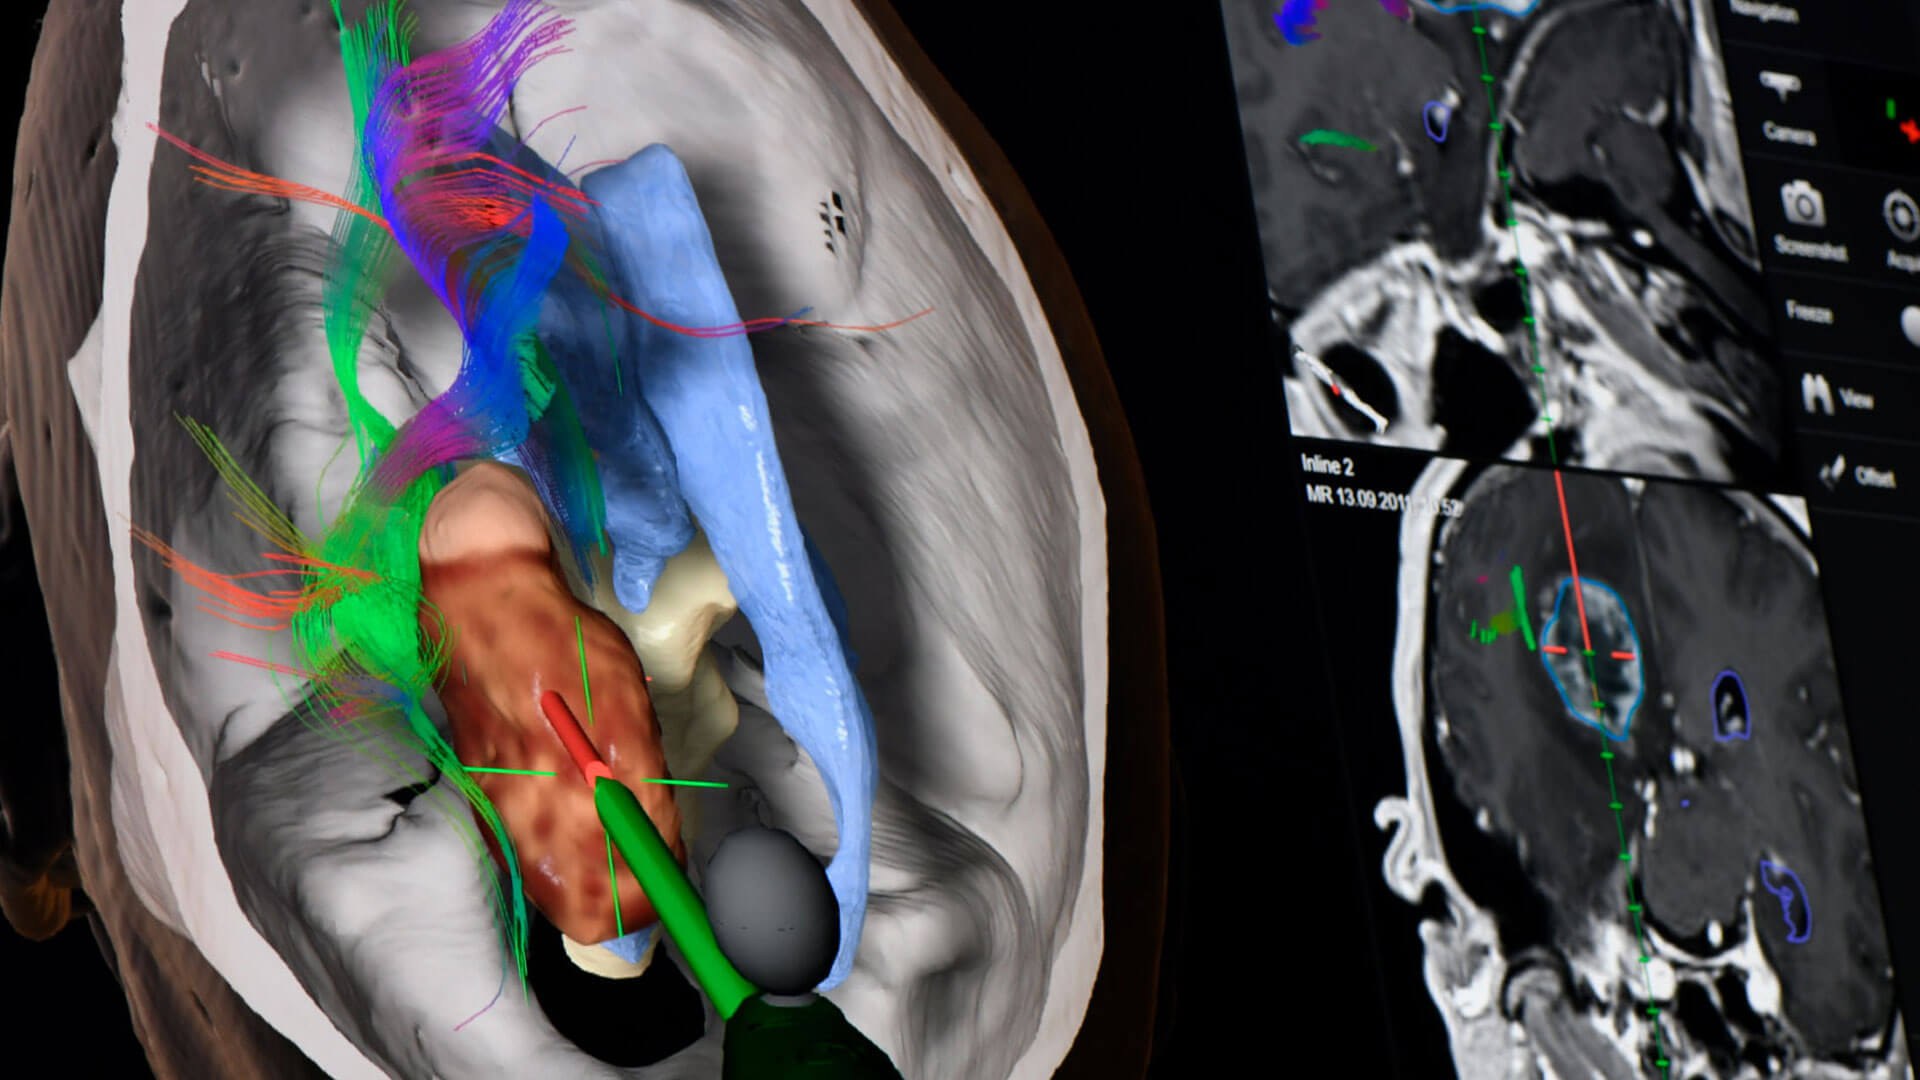 Detailed visualization of relevant anatomical information in one dedicated view